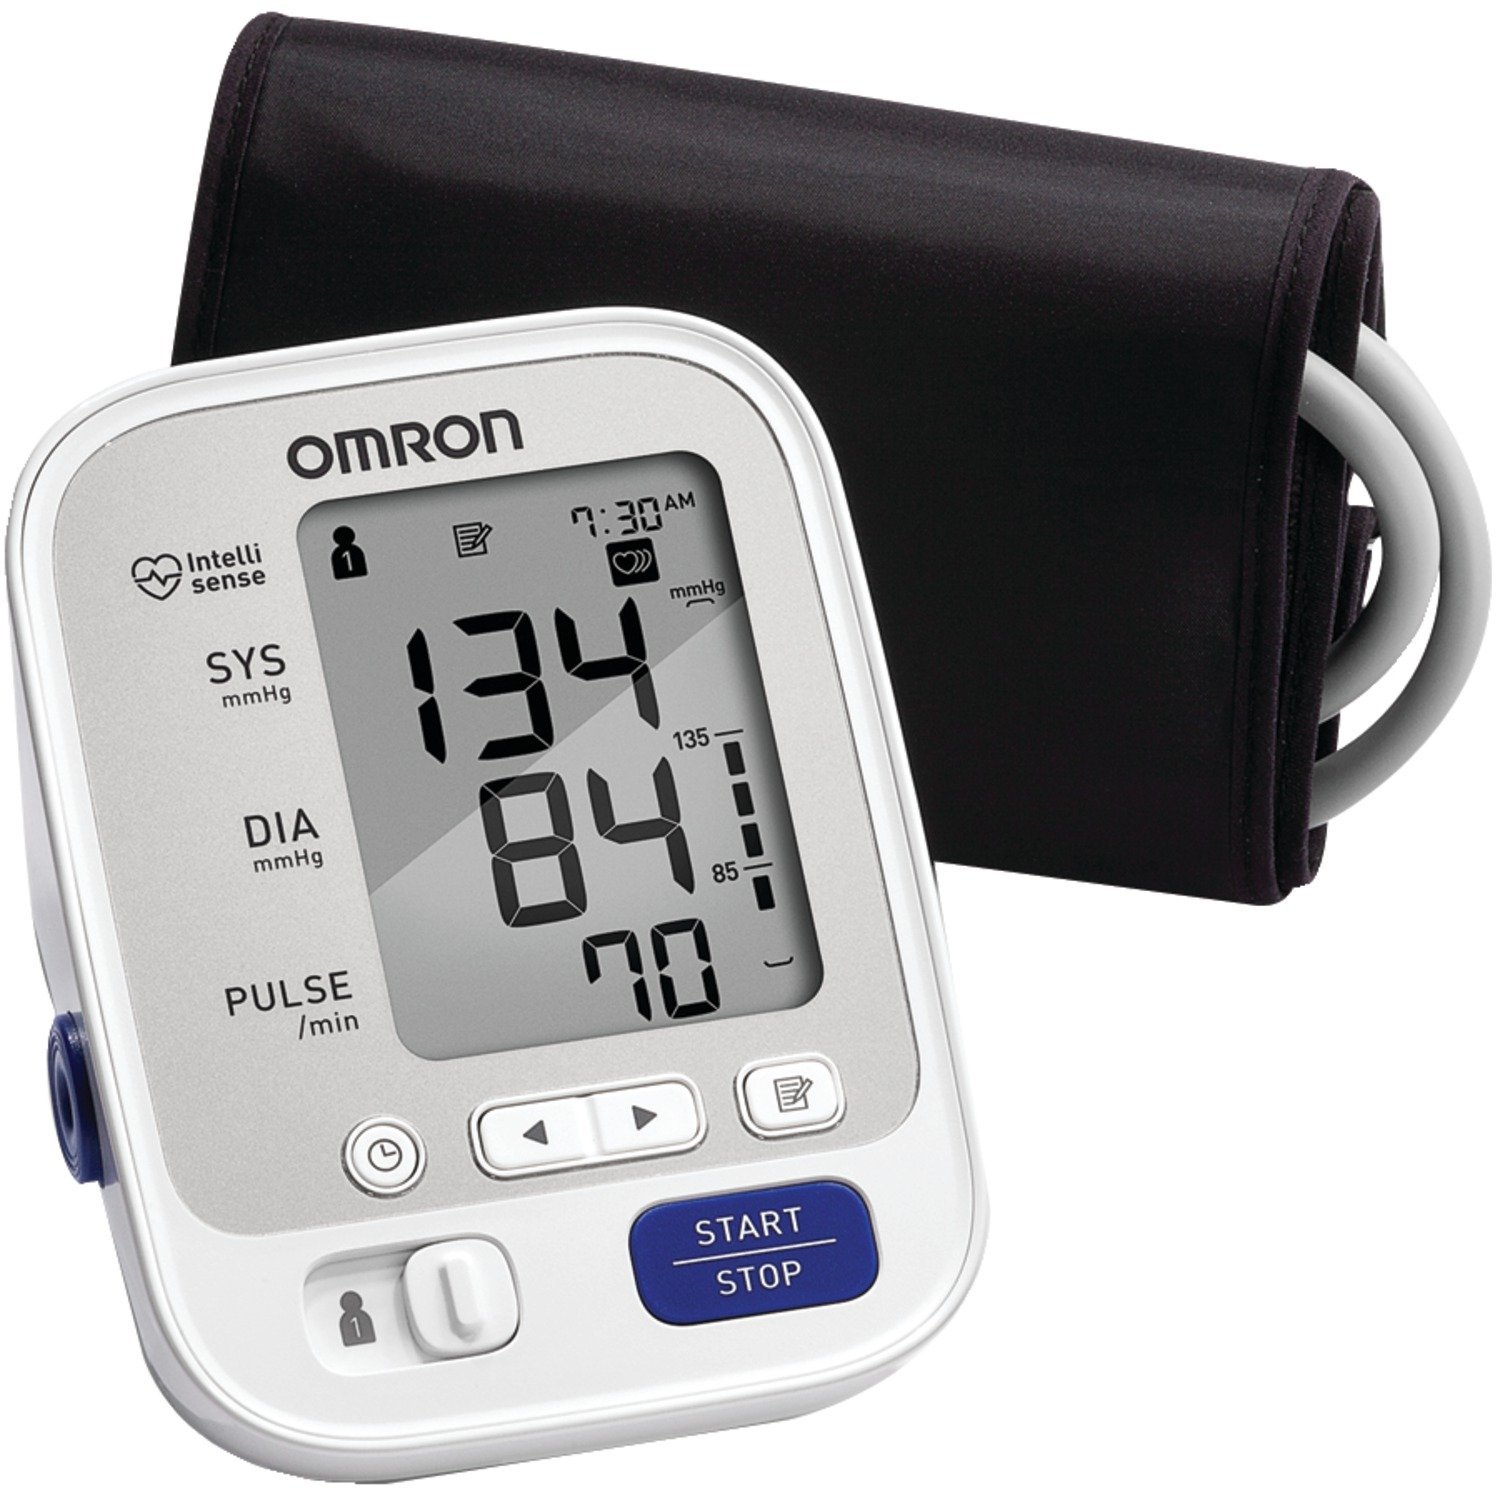 Omron 5 Series Upper Arm Blood Pressure Monitor Review ...